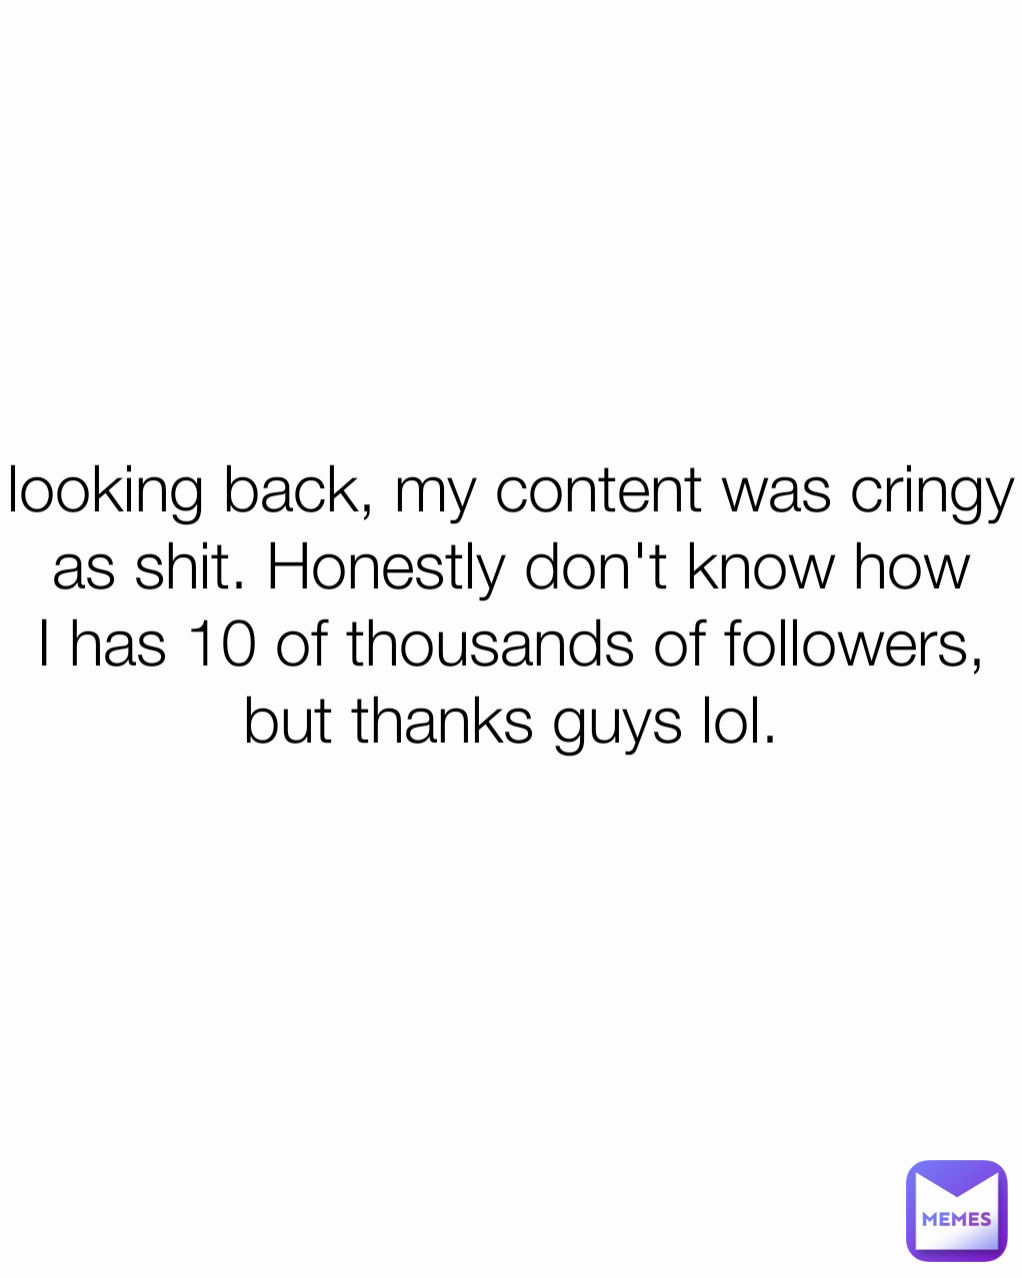 looking back, my content was cringy as shit. Honestly don't know how I has 10 of thousands of followers, but thanks guys lol.
